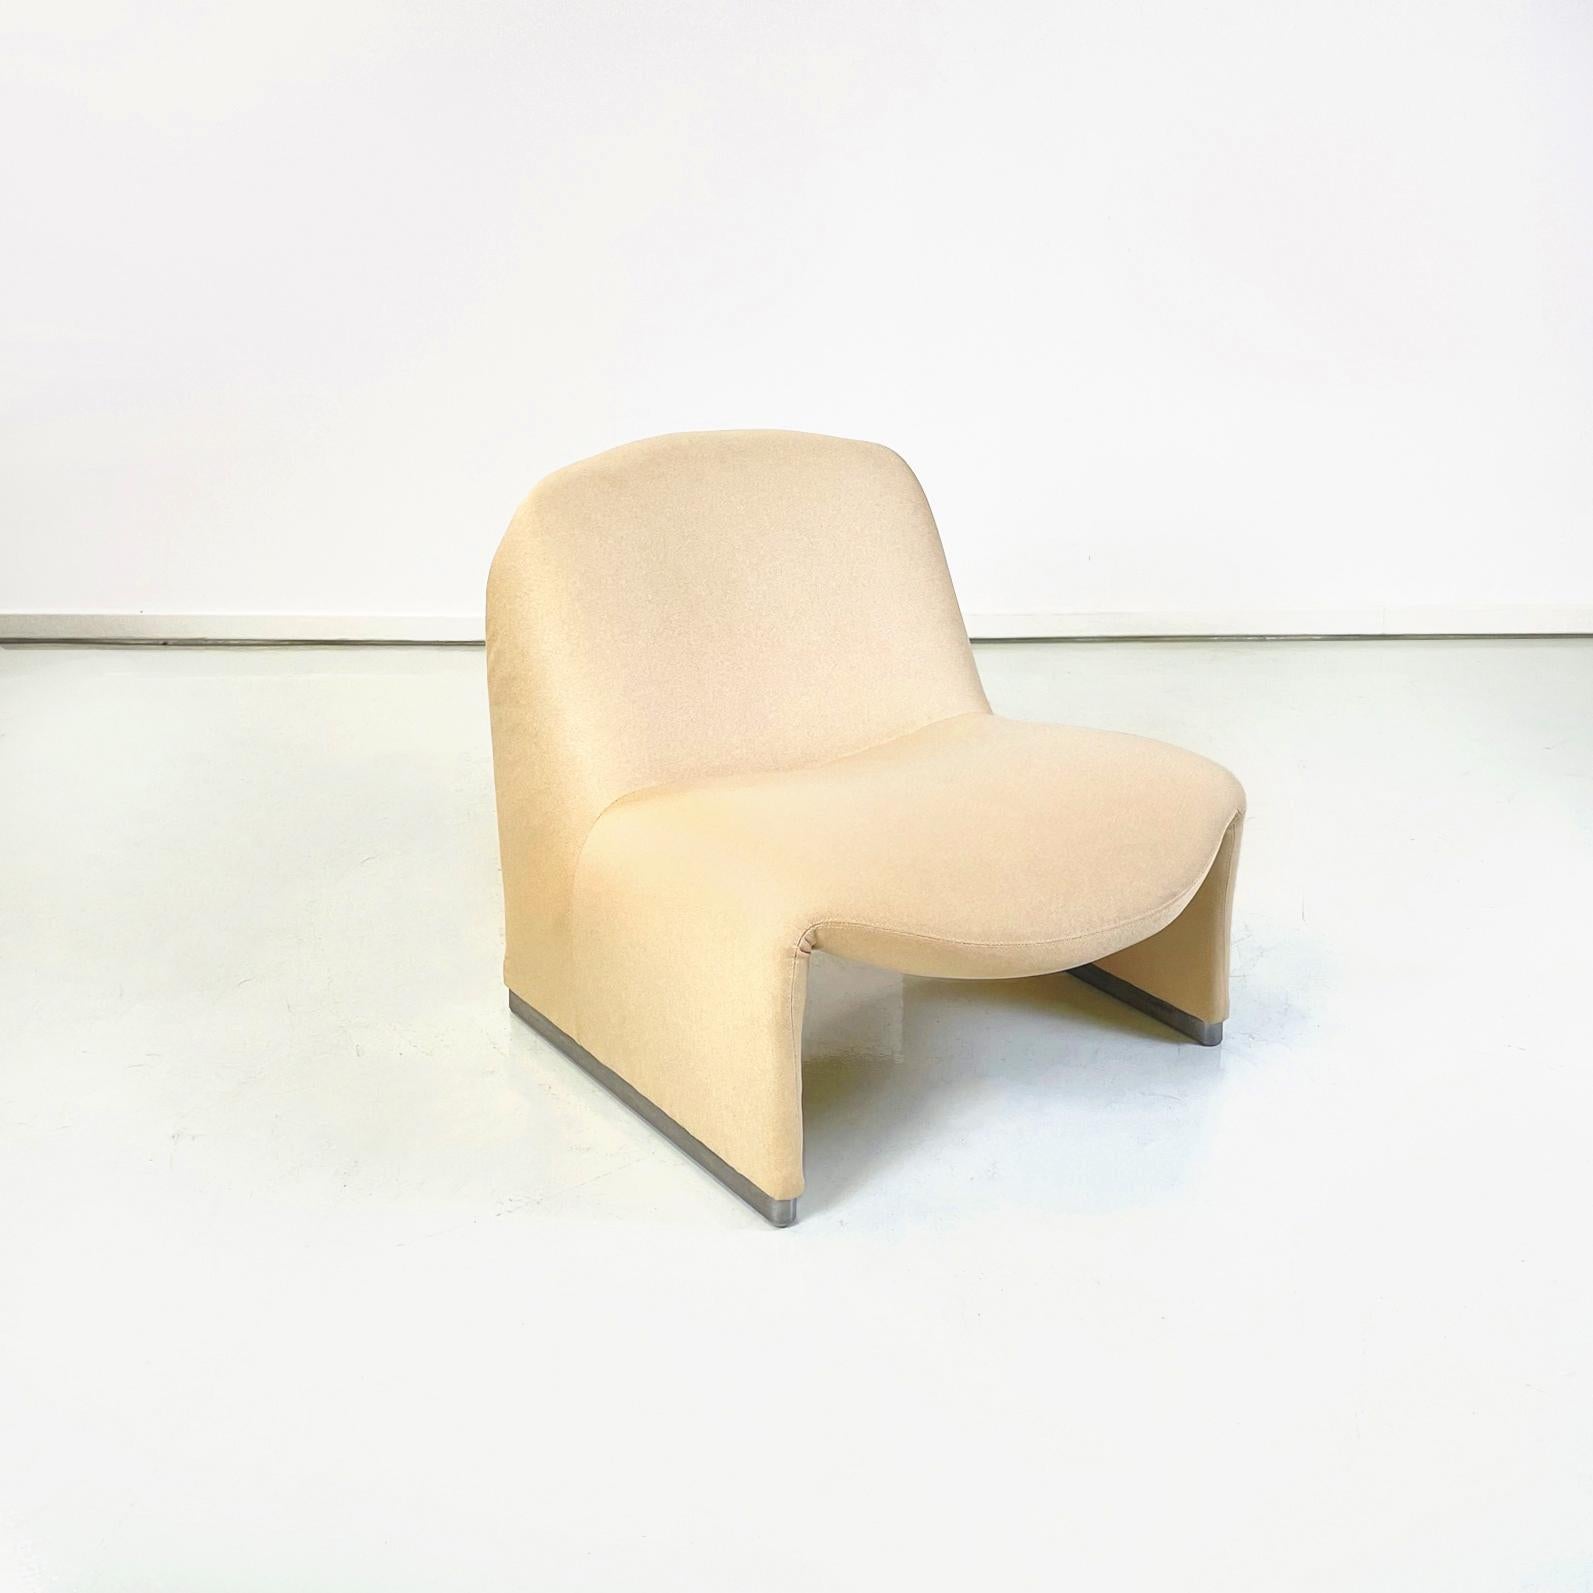 Italian modern Beige chairs mod. Alky by Giancarlo Piretti for Anonima Castelli, 1970s
Fantastic pair of armchairs mod. Alky fully padded and covered in beige fabric. The two legs have metal feet.
Produced by Anonima Castelli in 1970s and designed